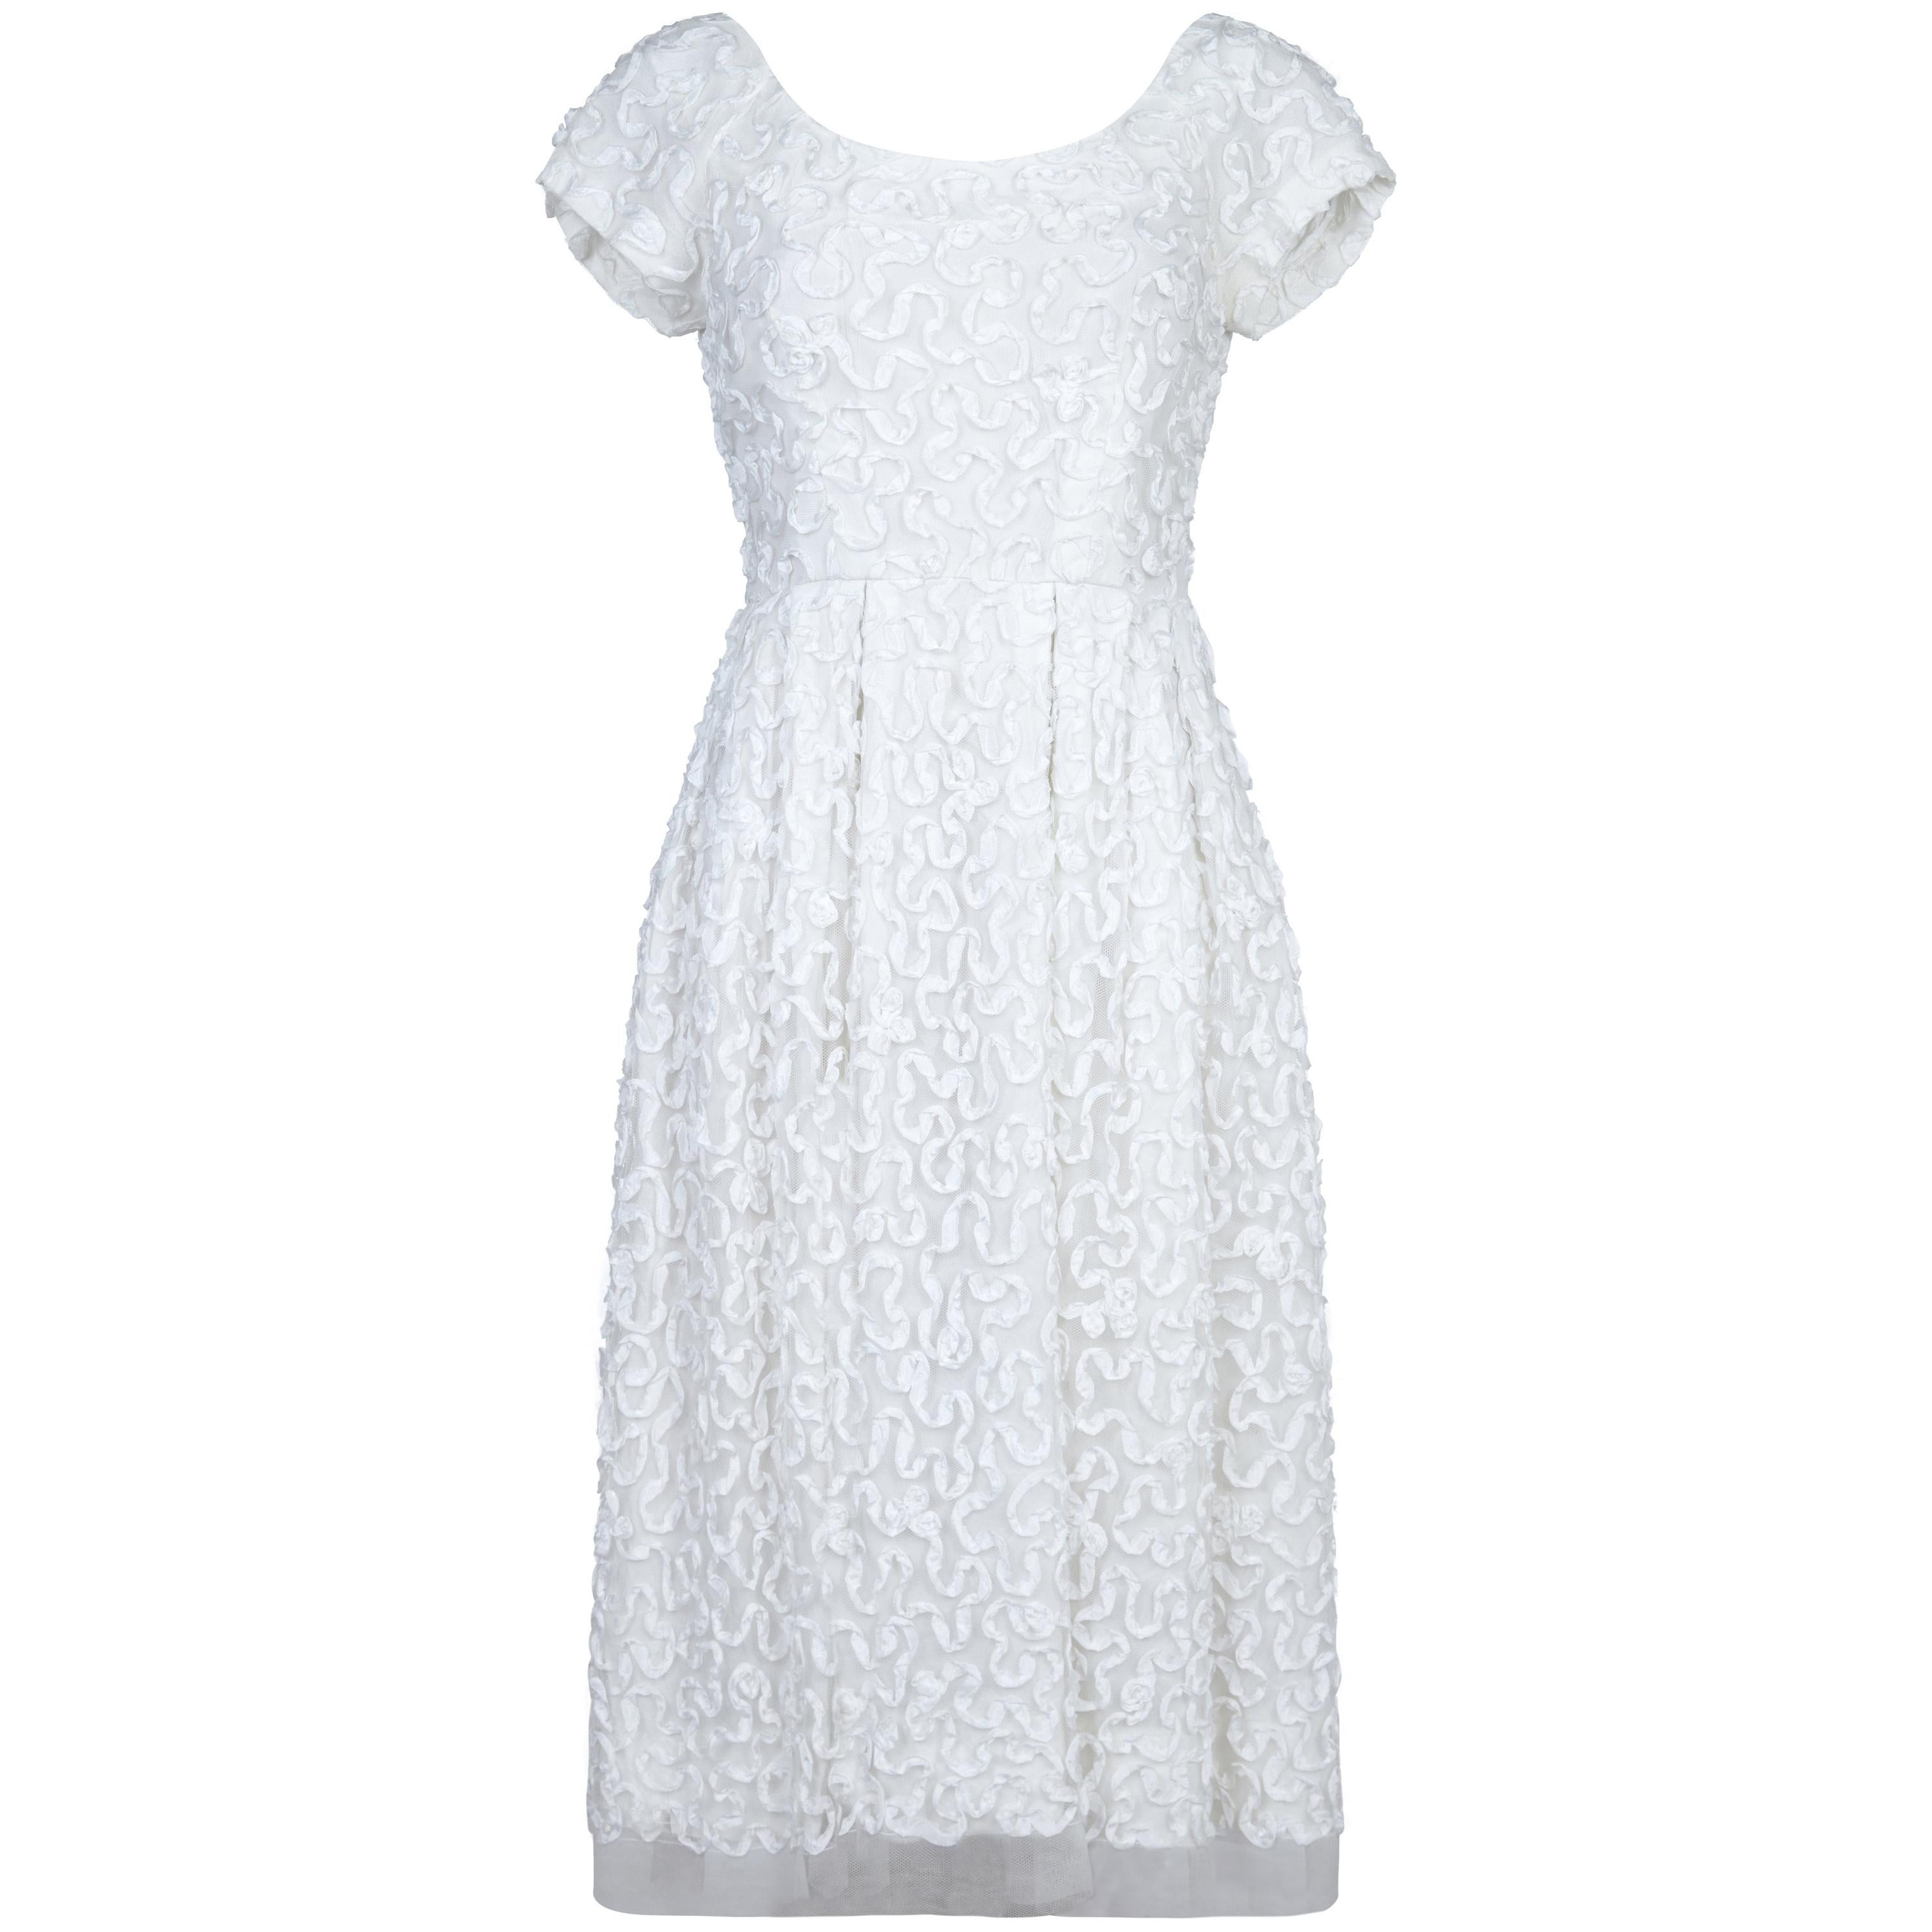 1950s Diana Warren White Tulle Dress With Ribbon Appliqué For Sale